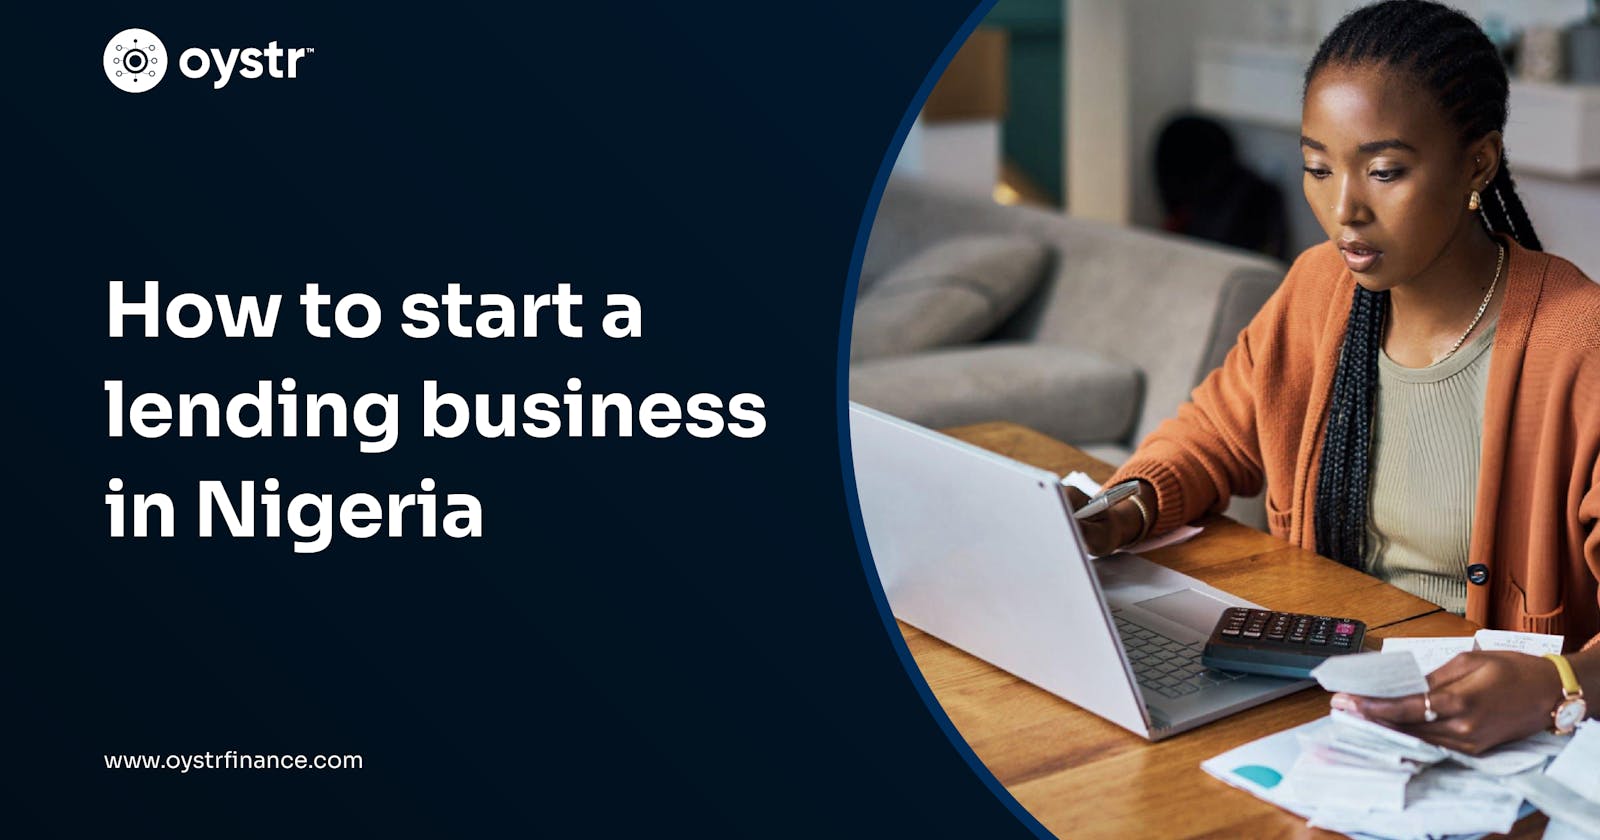 How to start a lending business in Nigeria